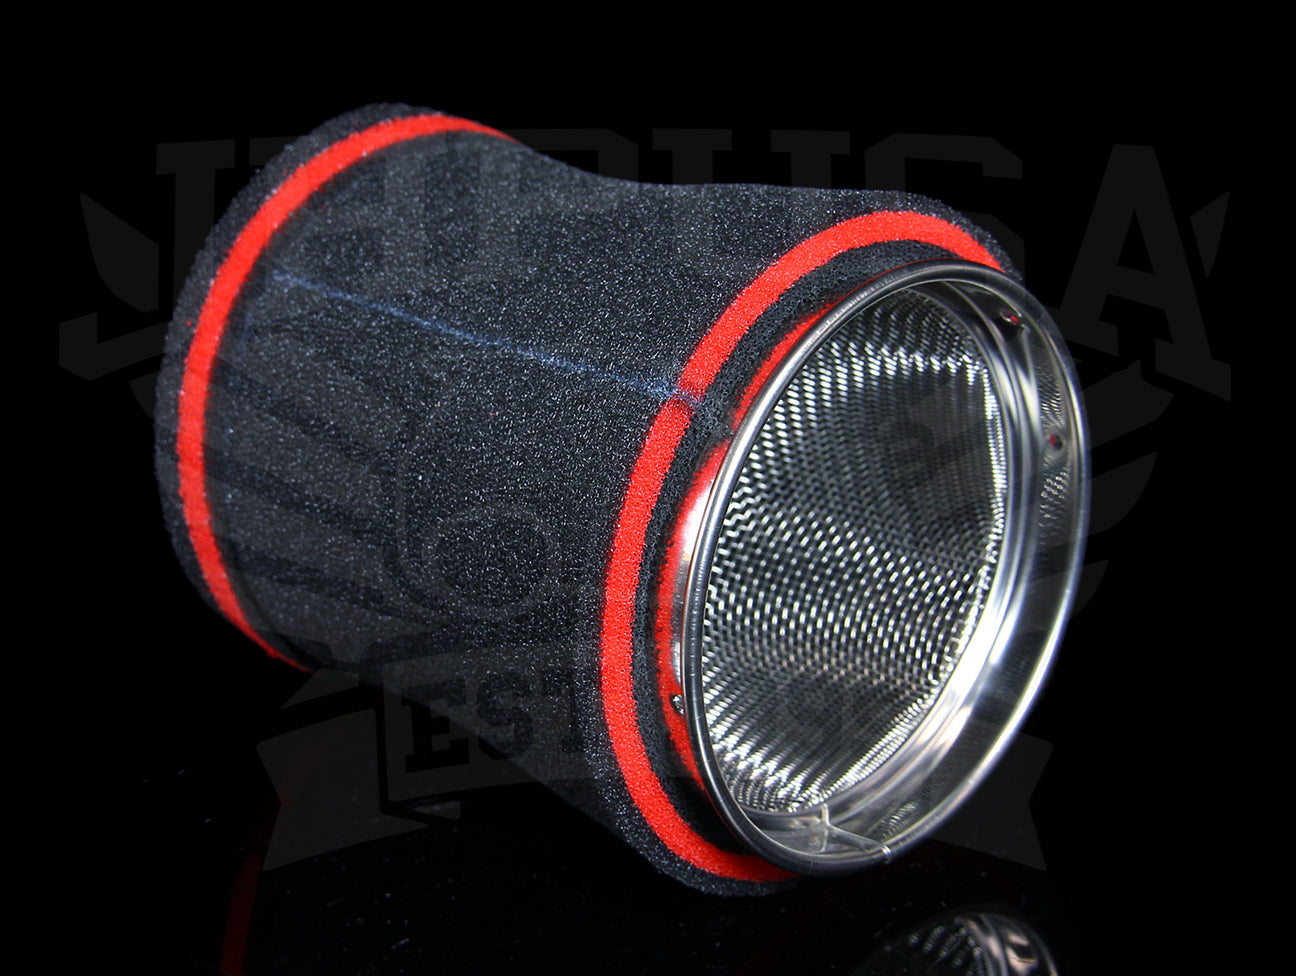 TODA Sport Injection Air Filter & Trumpet Mesh Cover Set - JDM